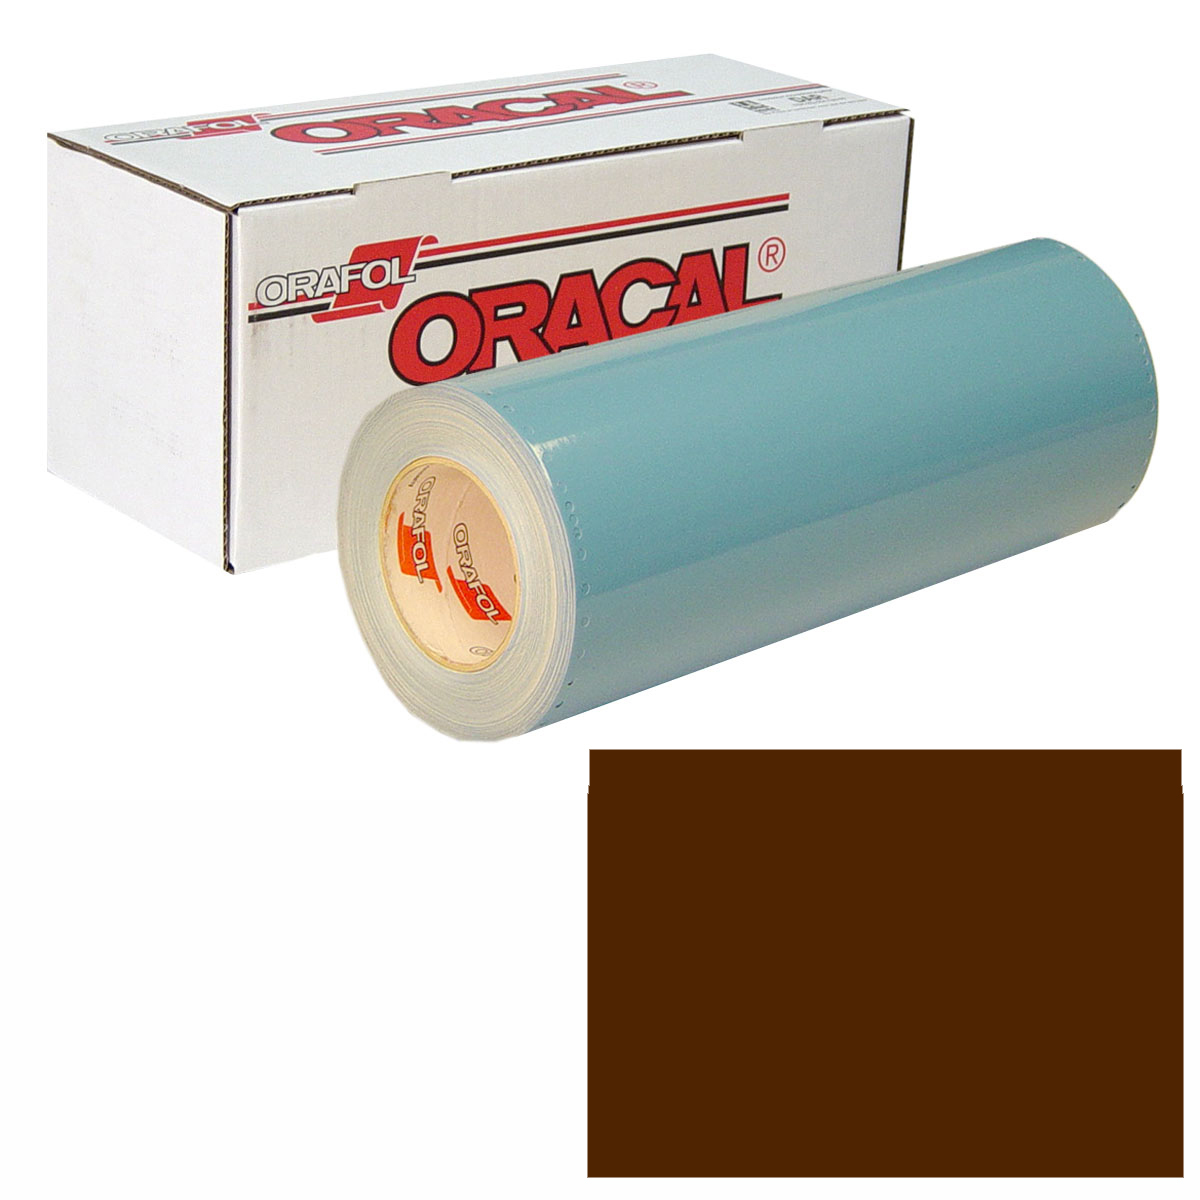 ORACAL 751 30in X 10yd 080 Brown